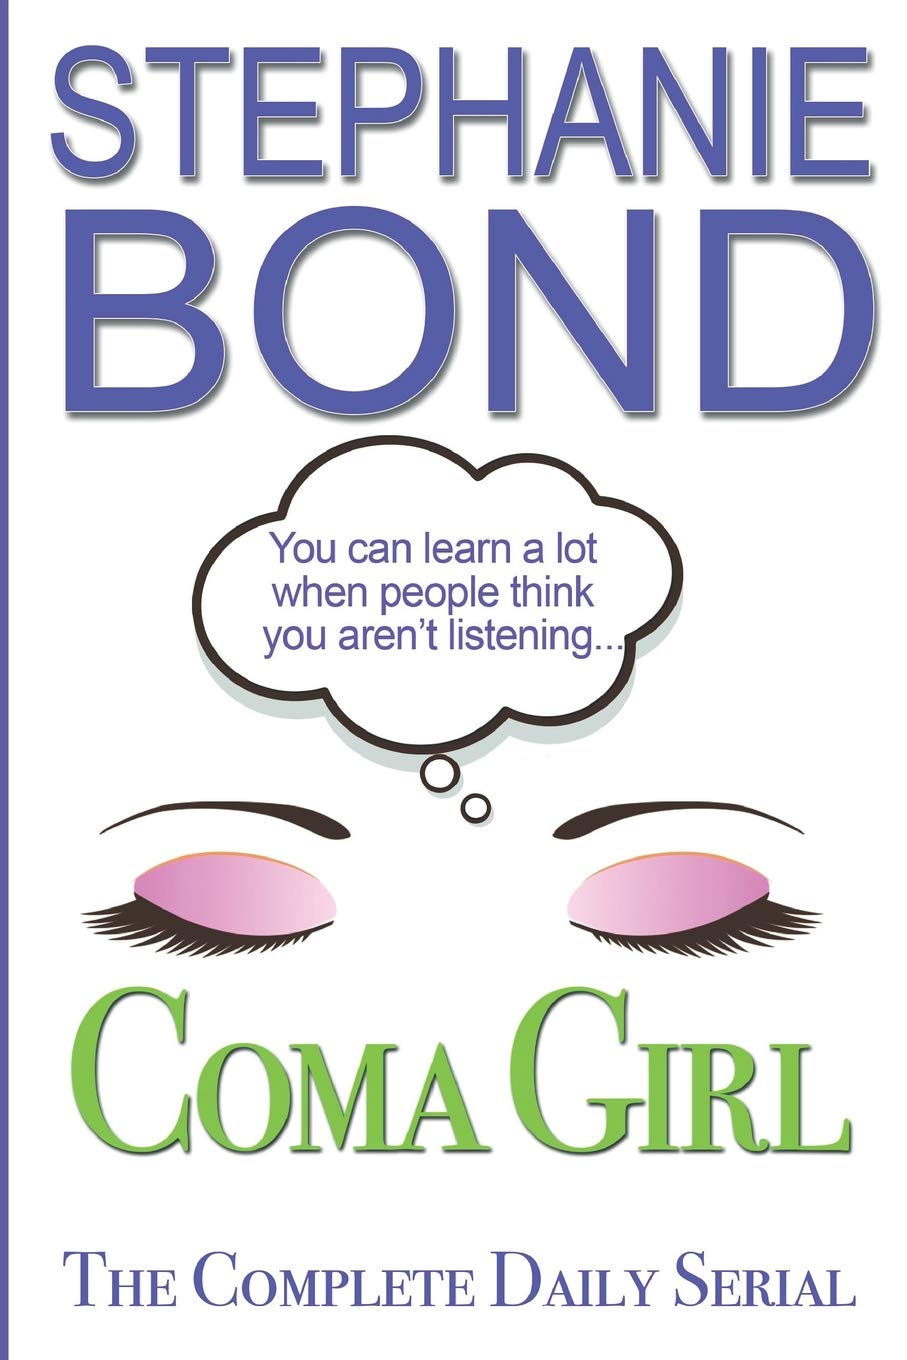 COMA GIRL, The Complete Daily Serial